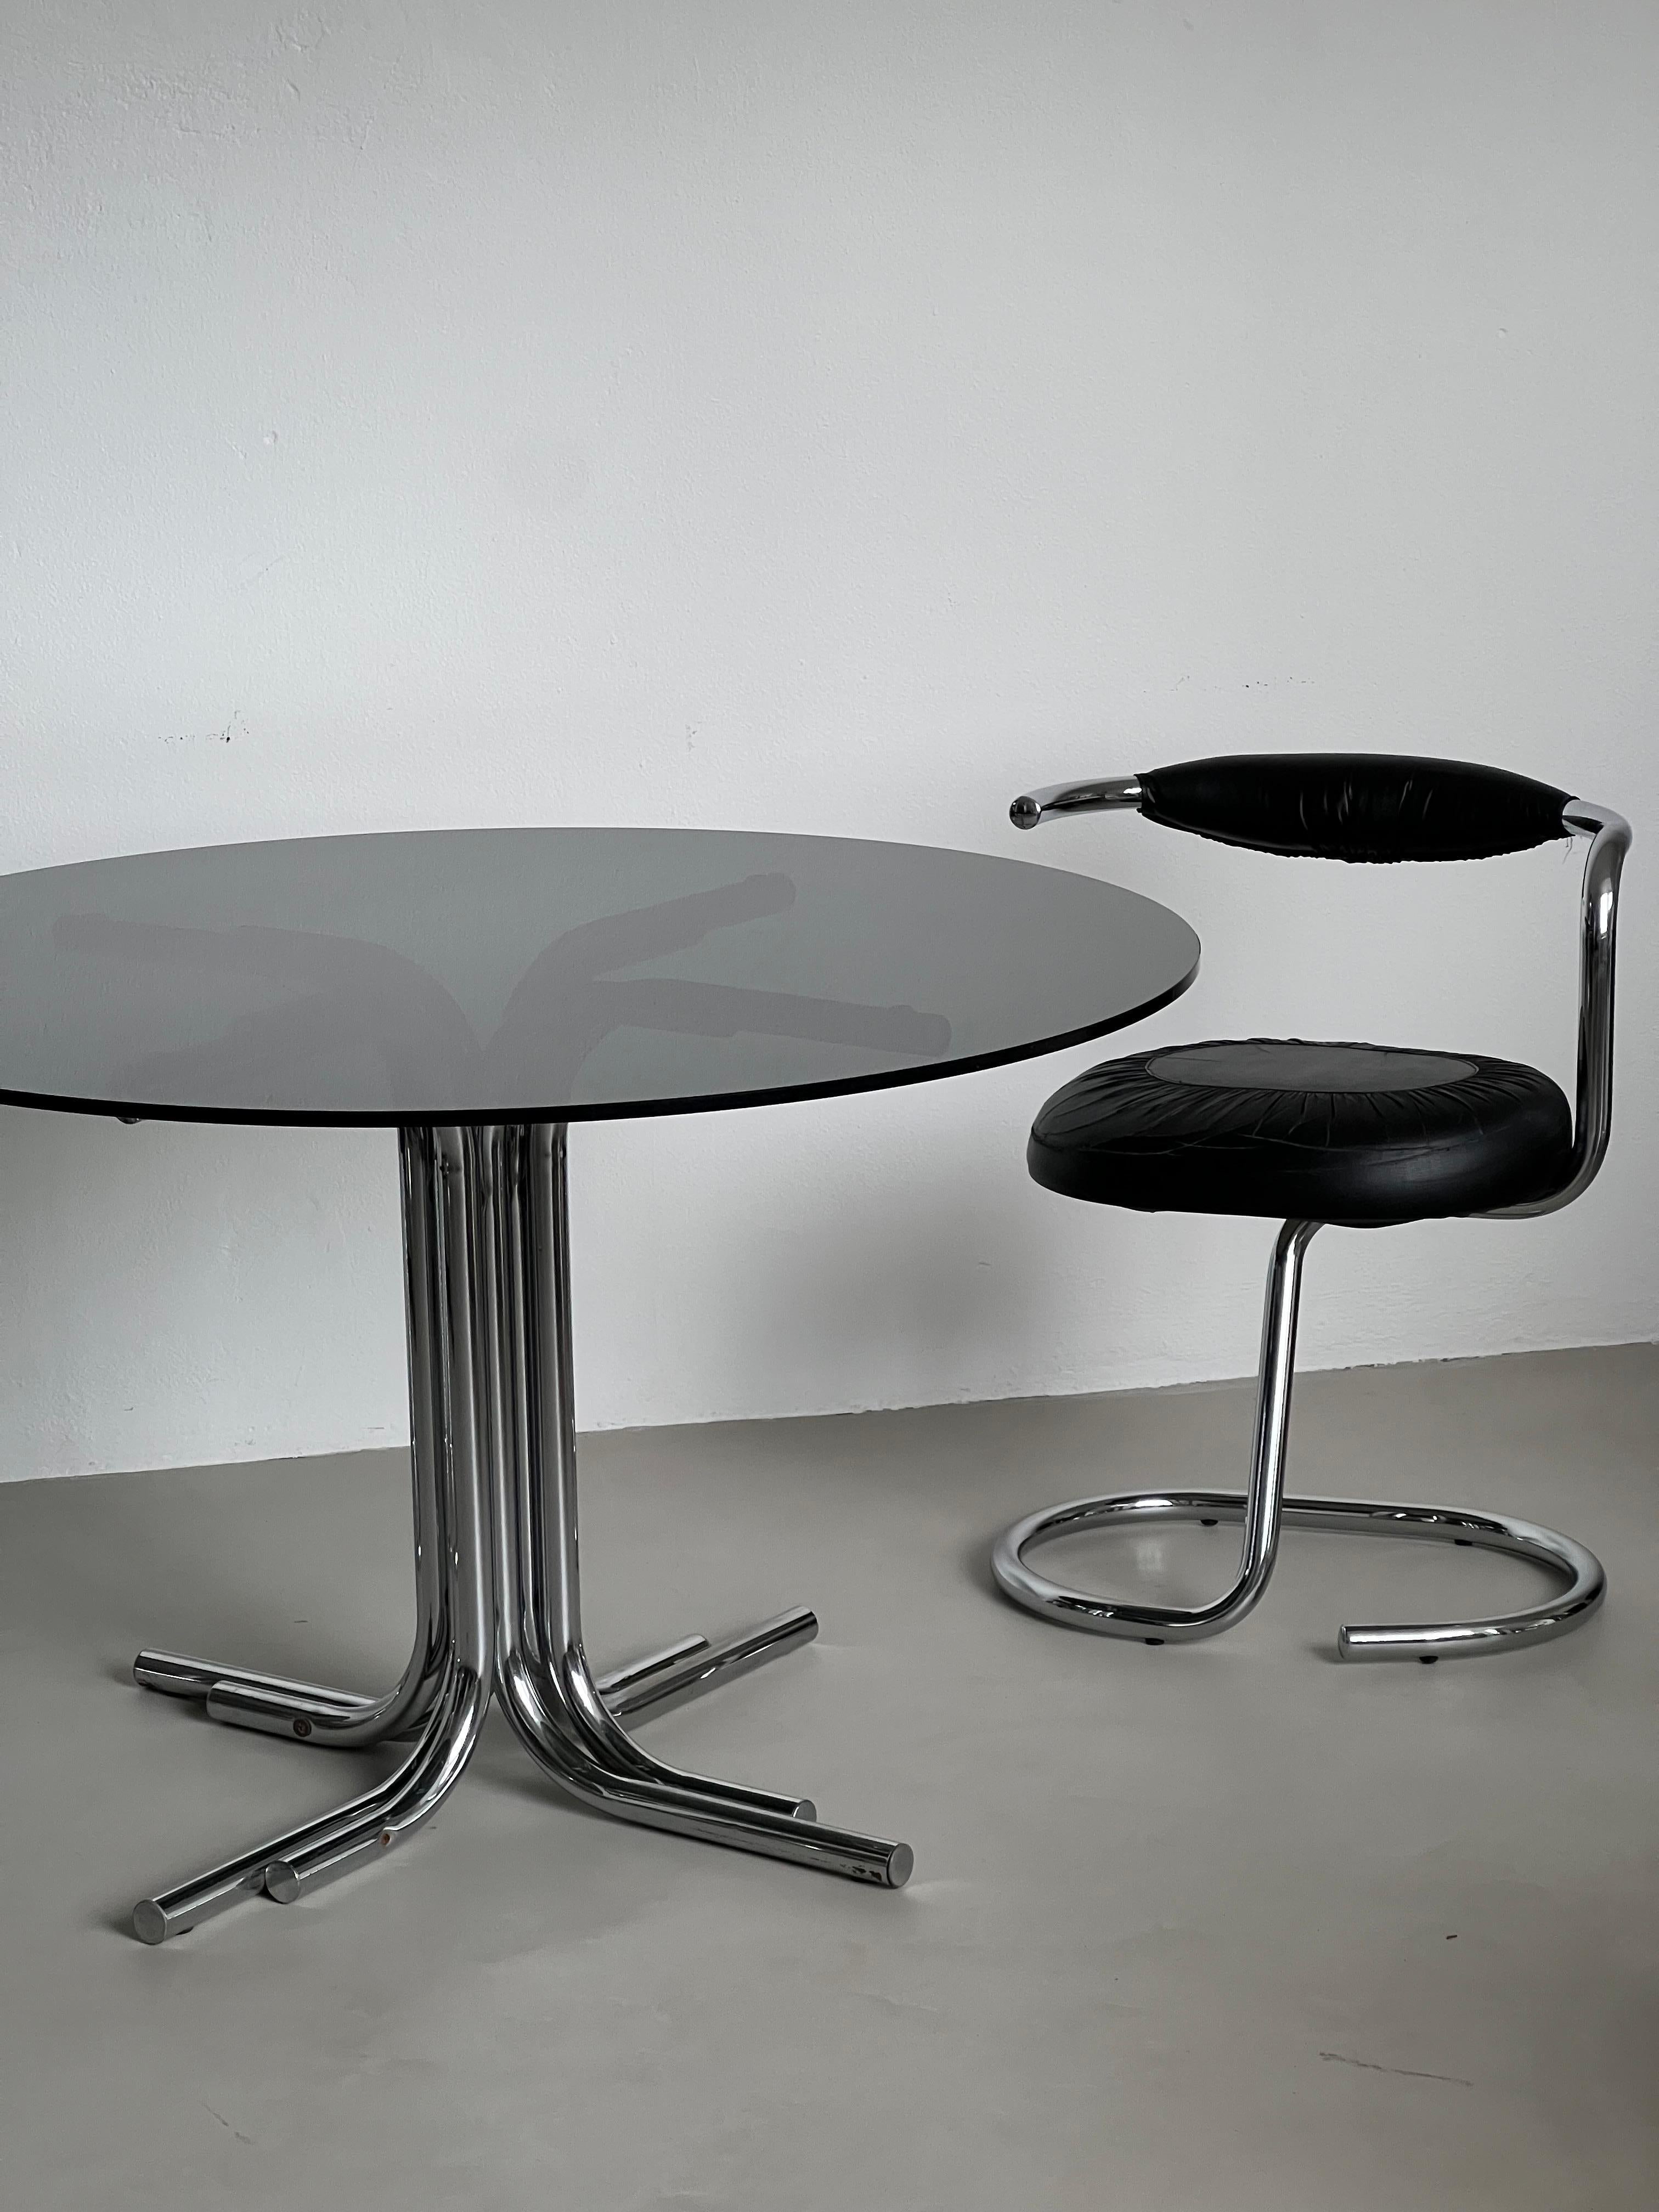 Vintage Italian Space Age Dining Table with Chromed Legs and Smoked Glass Top For Sale 1